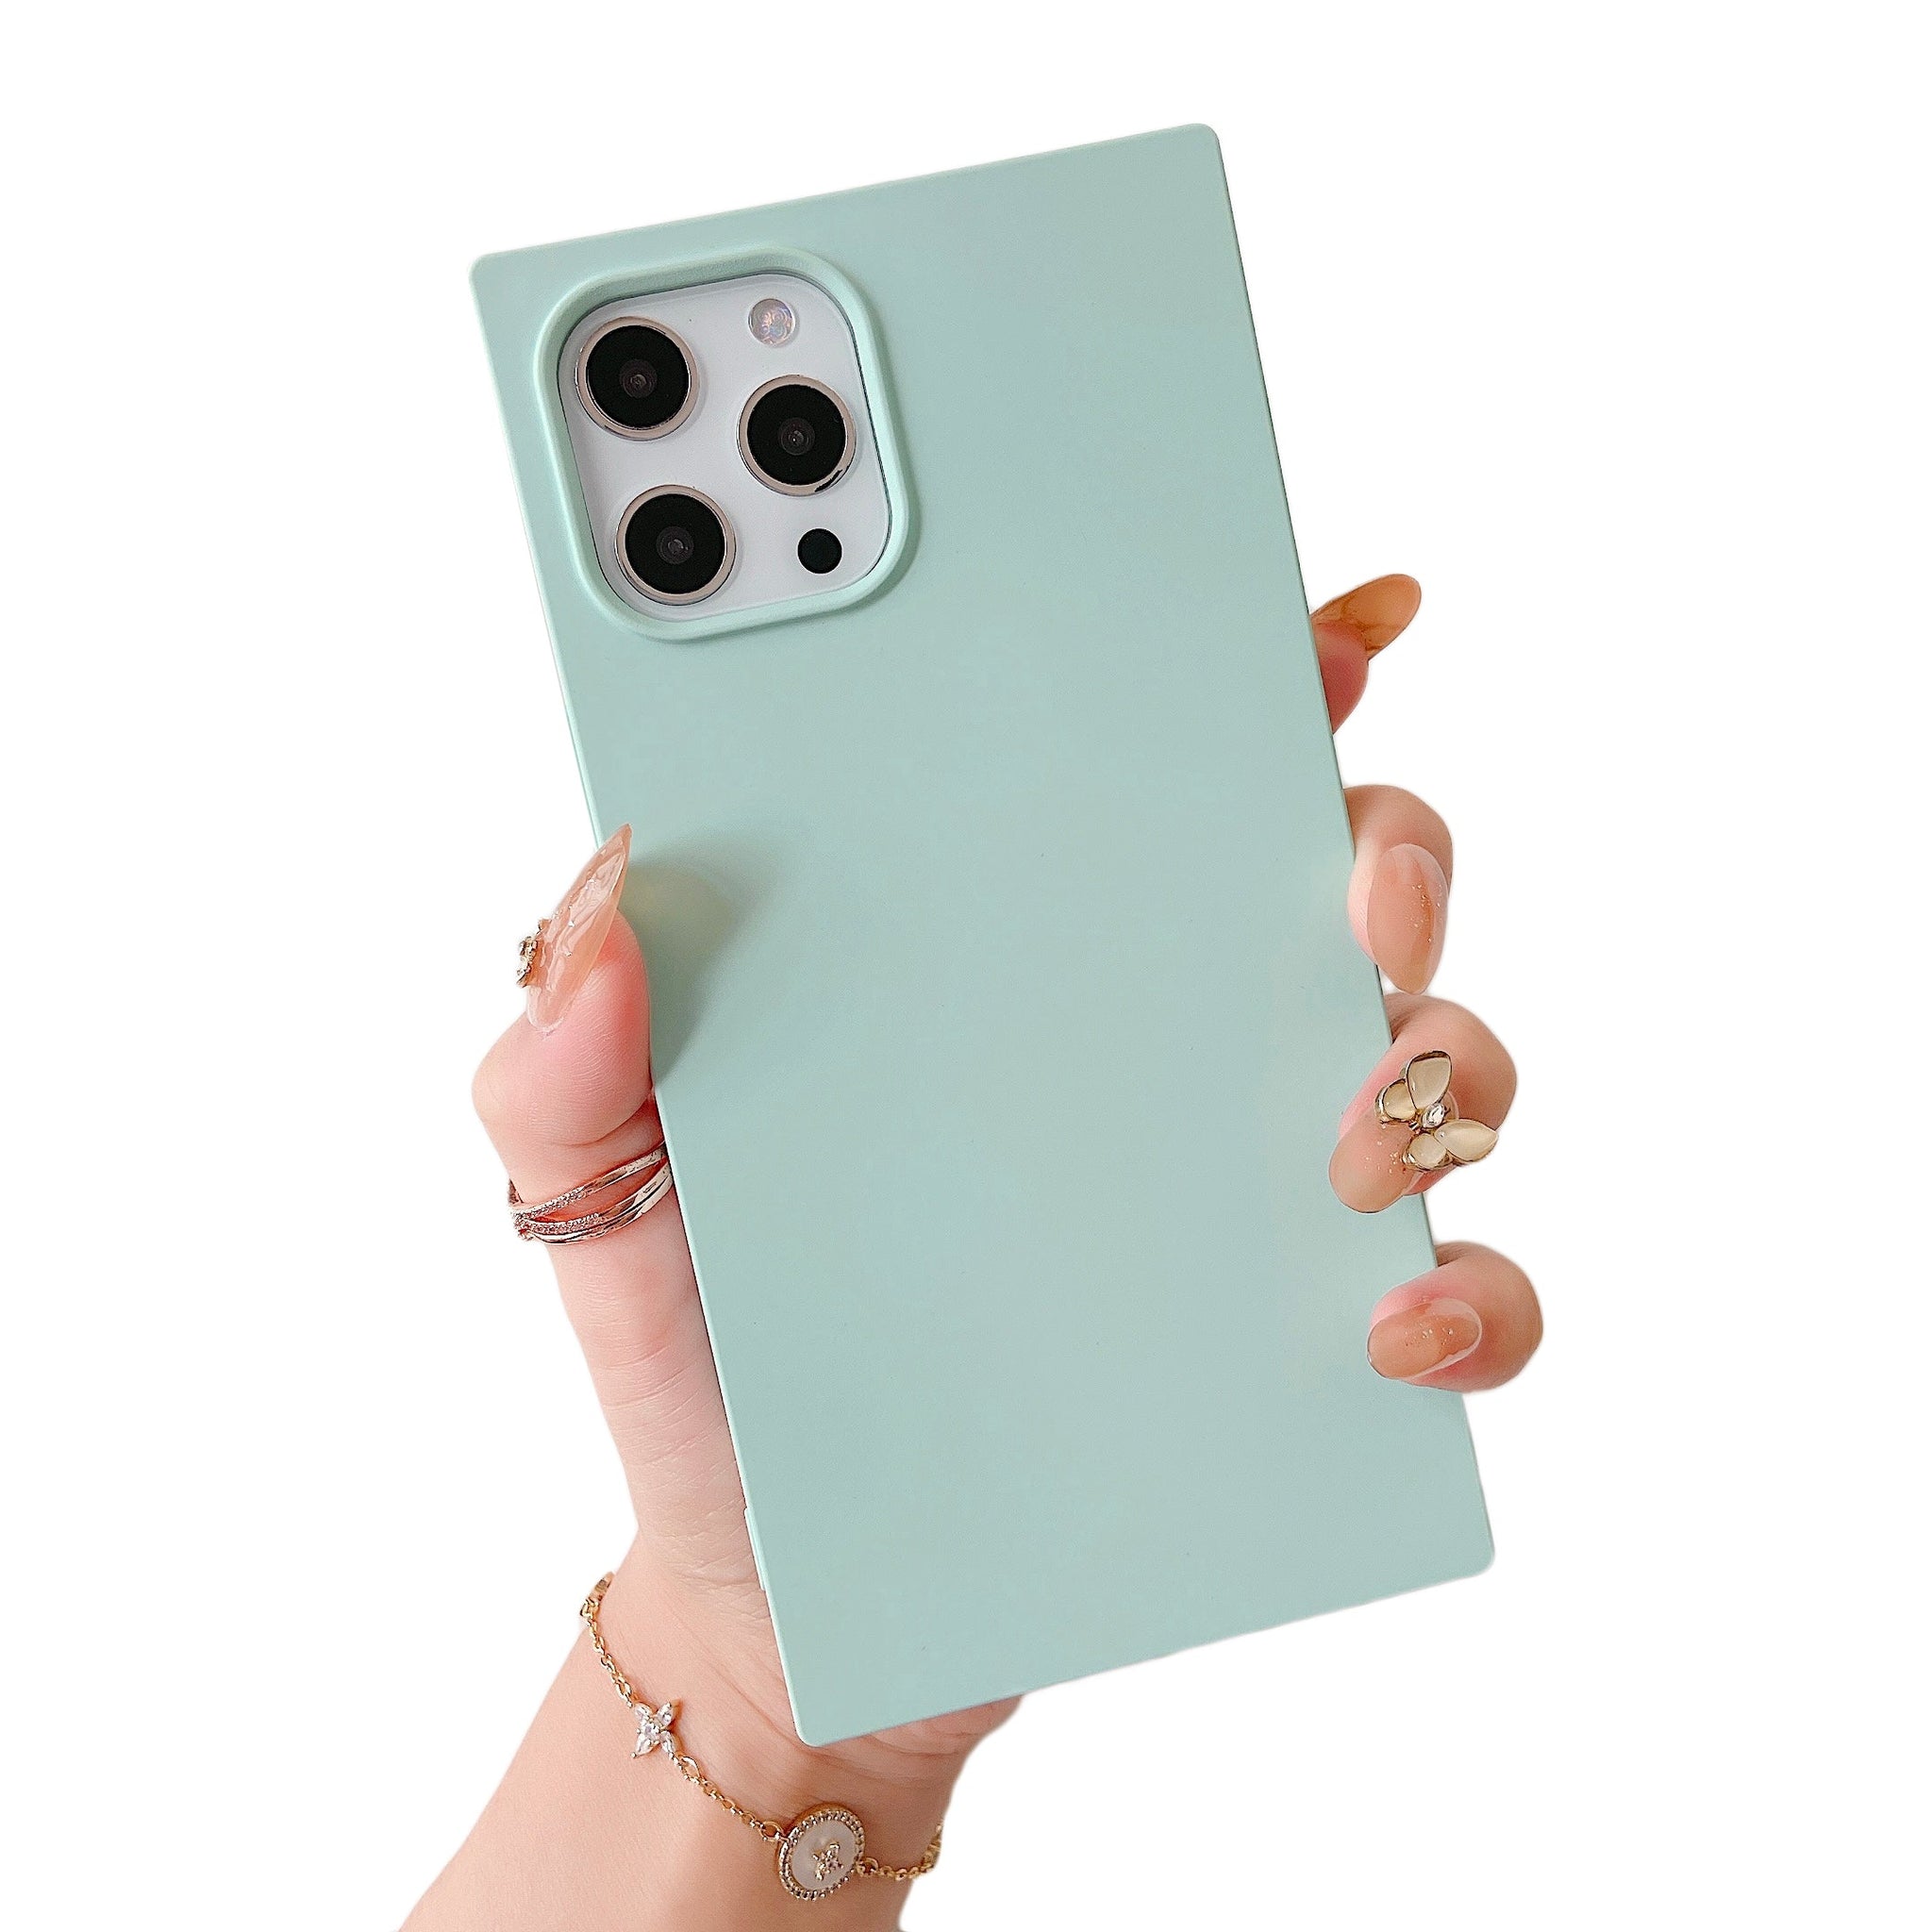 iPhone 12/12 Pro Case Square Silicone (Mint Green)